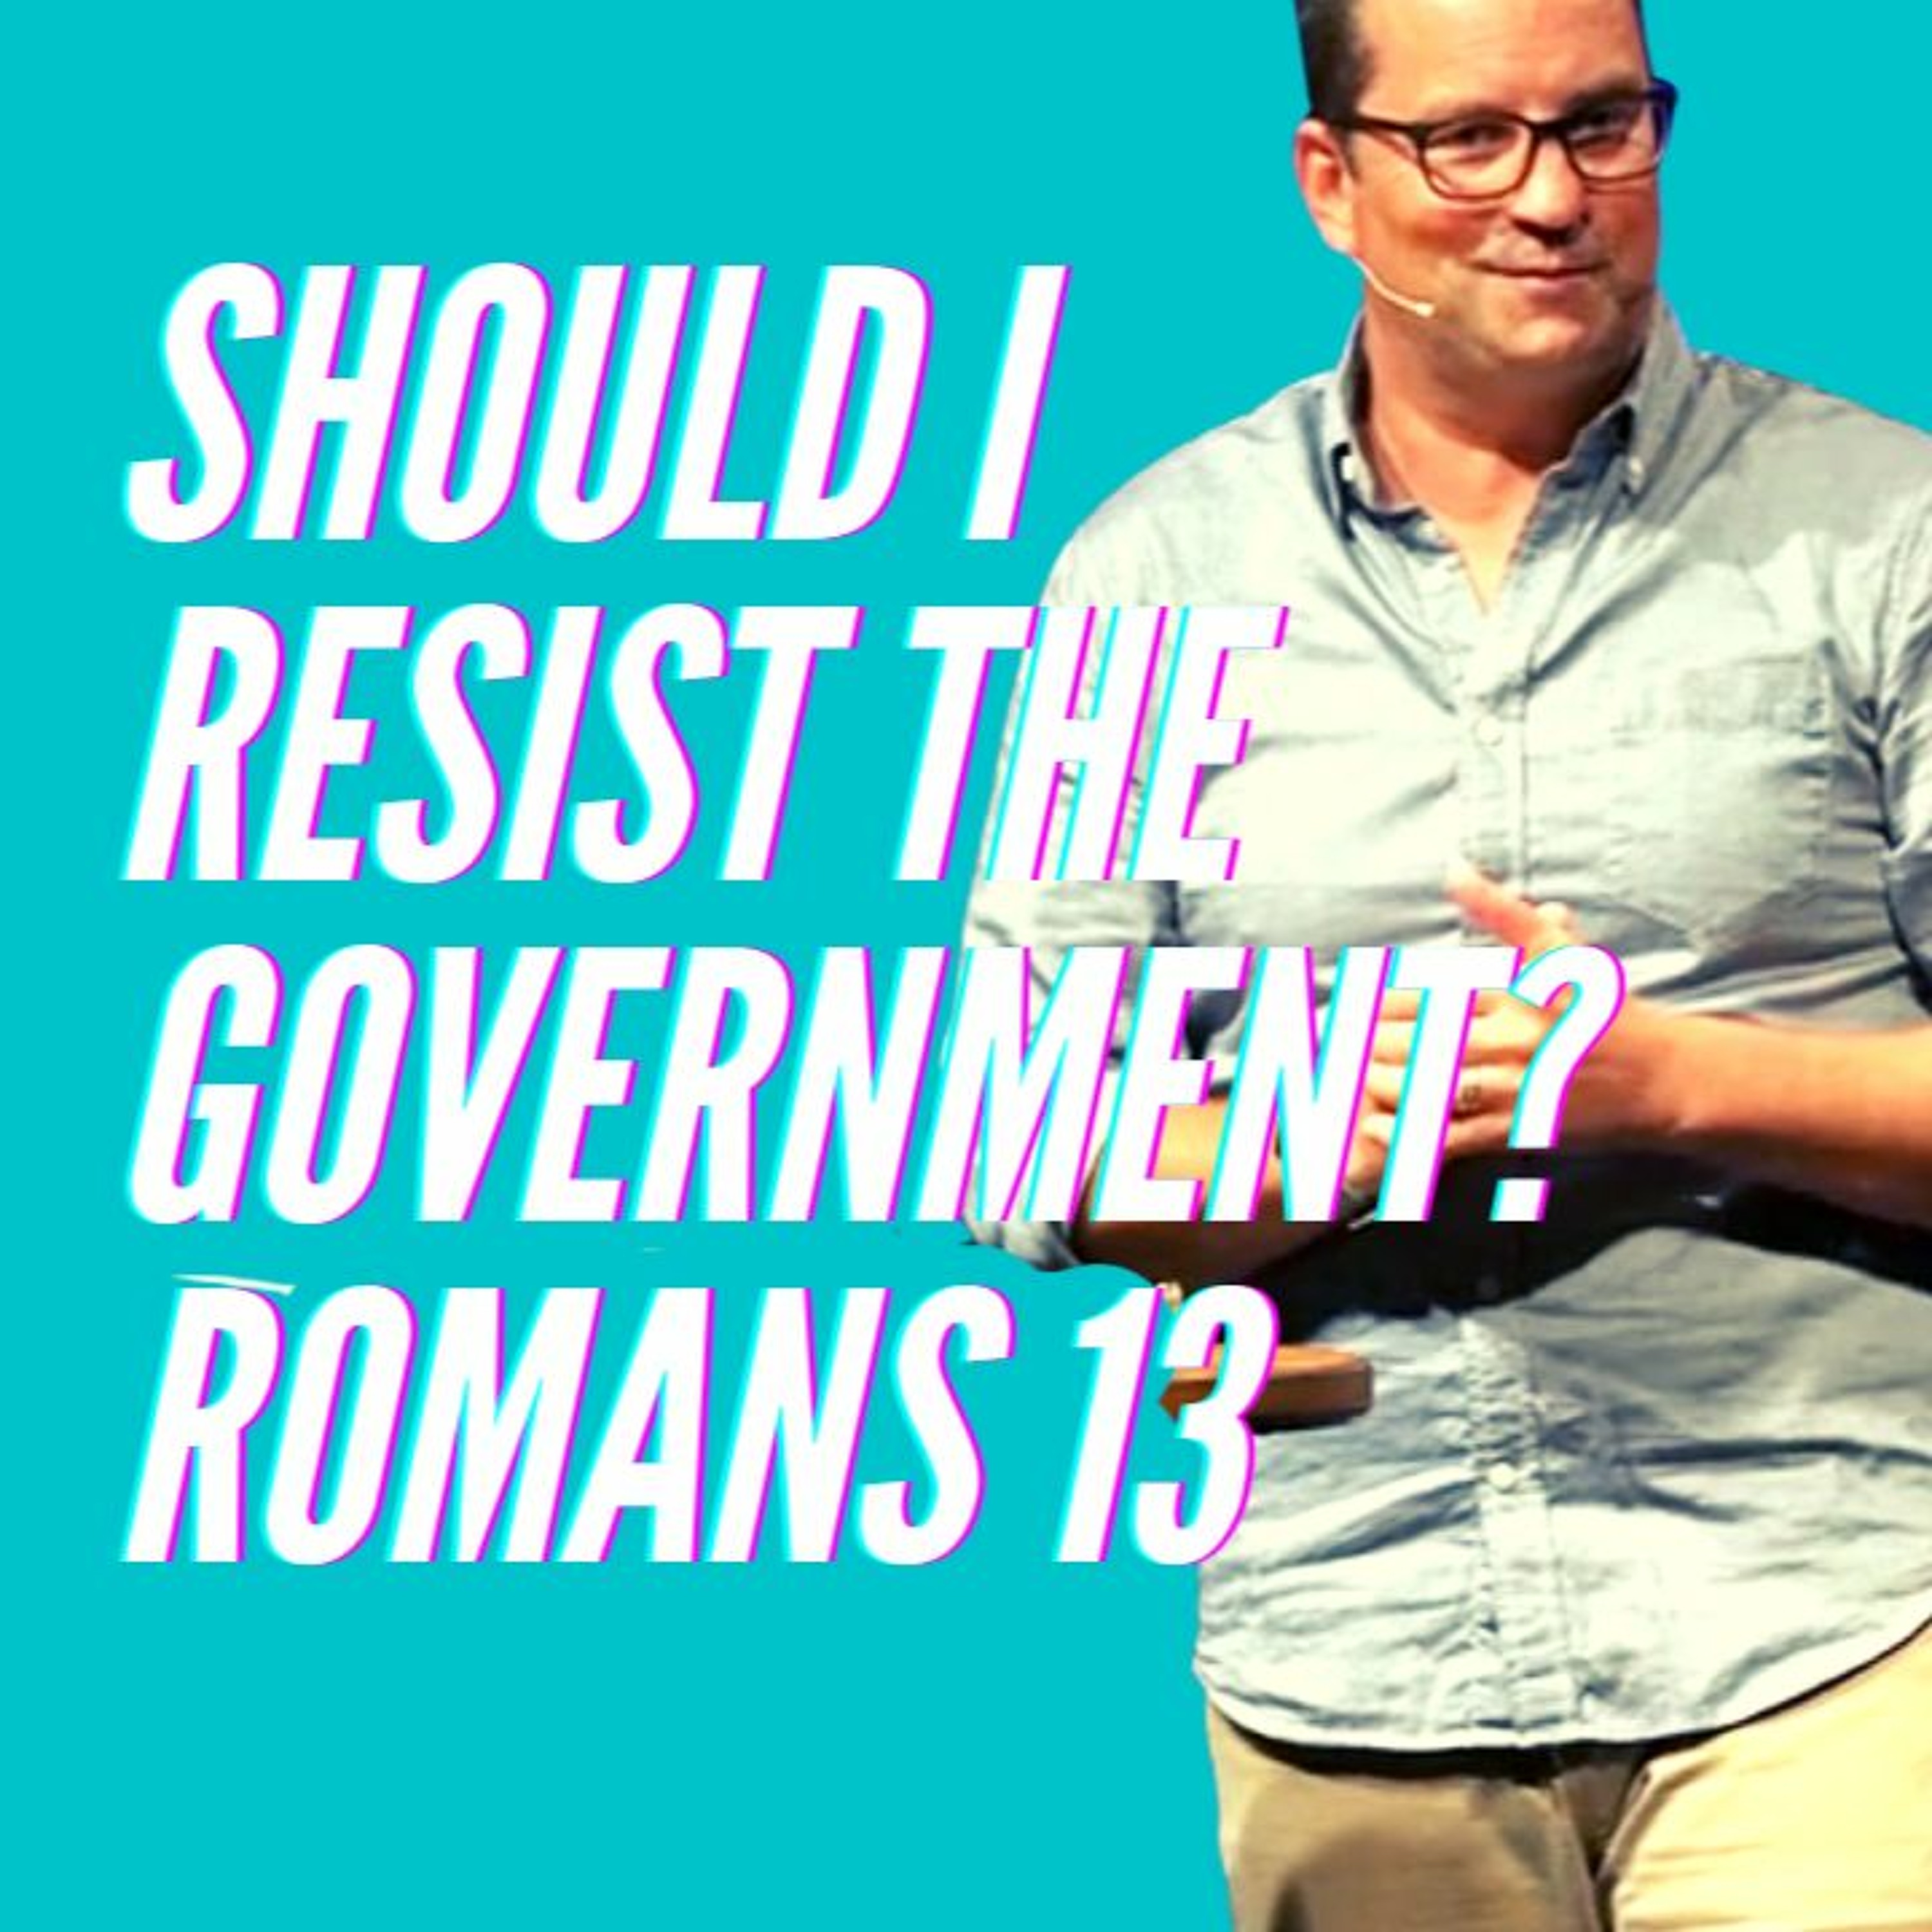 Should I Resist The Government, Romans 13